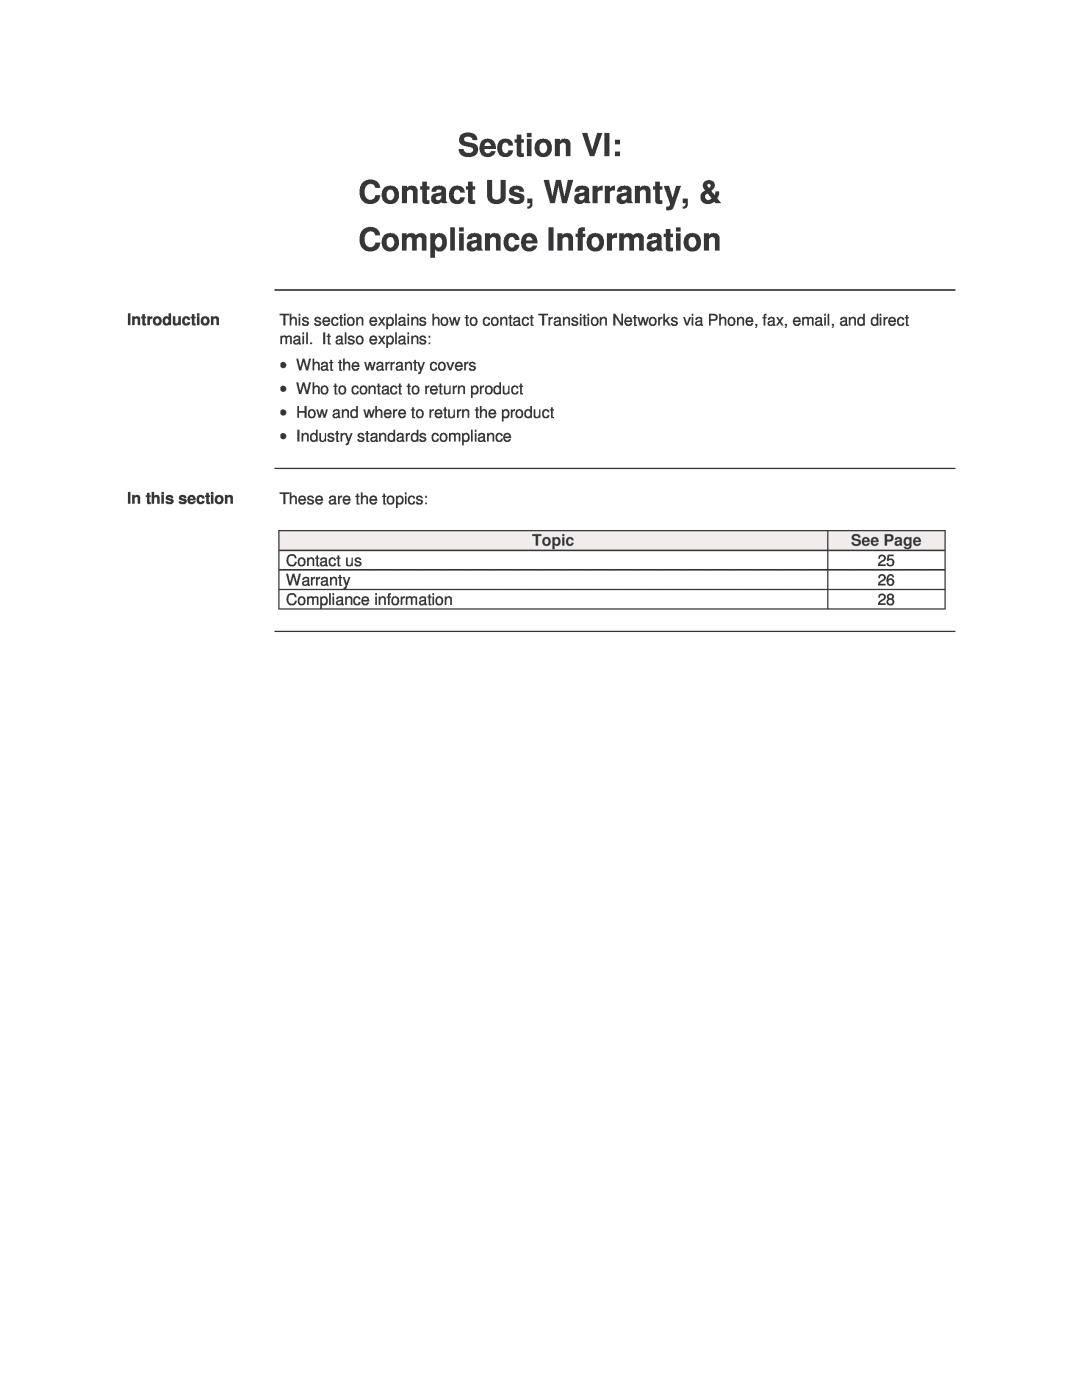 Transition Networks SISTF1010-150-LR(T) installation manual Contact Us, Warranty, Compliance Information, Section 